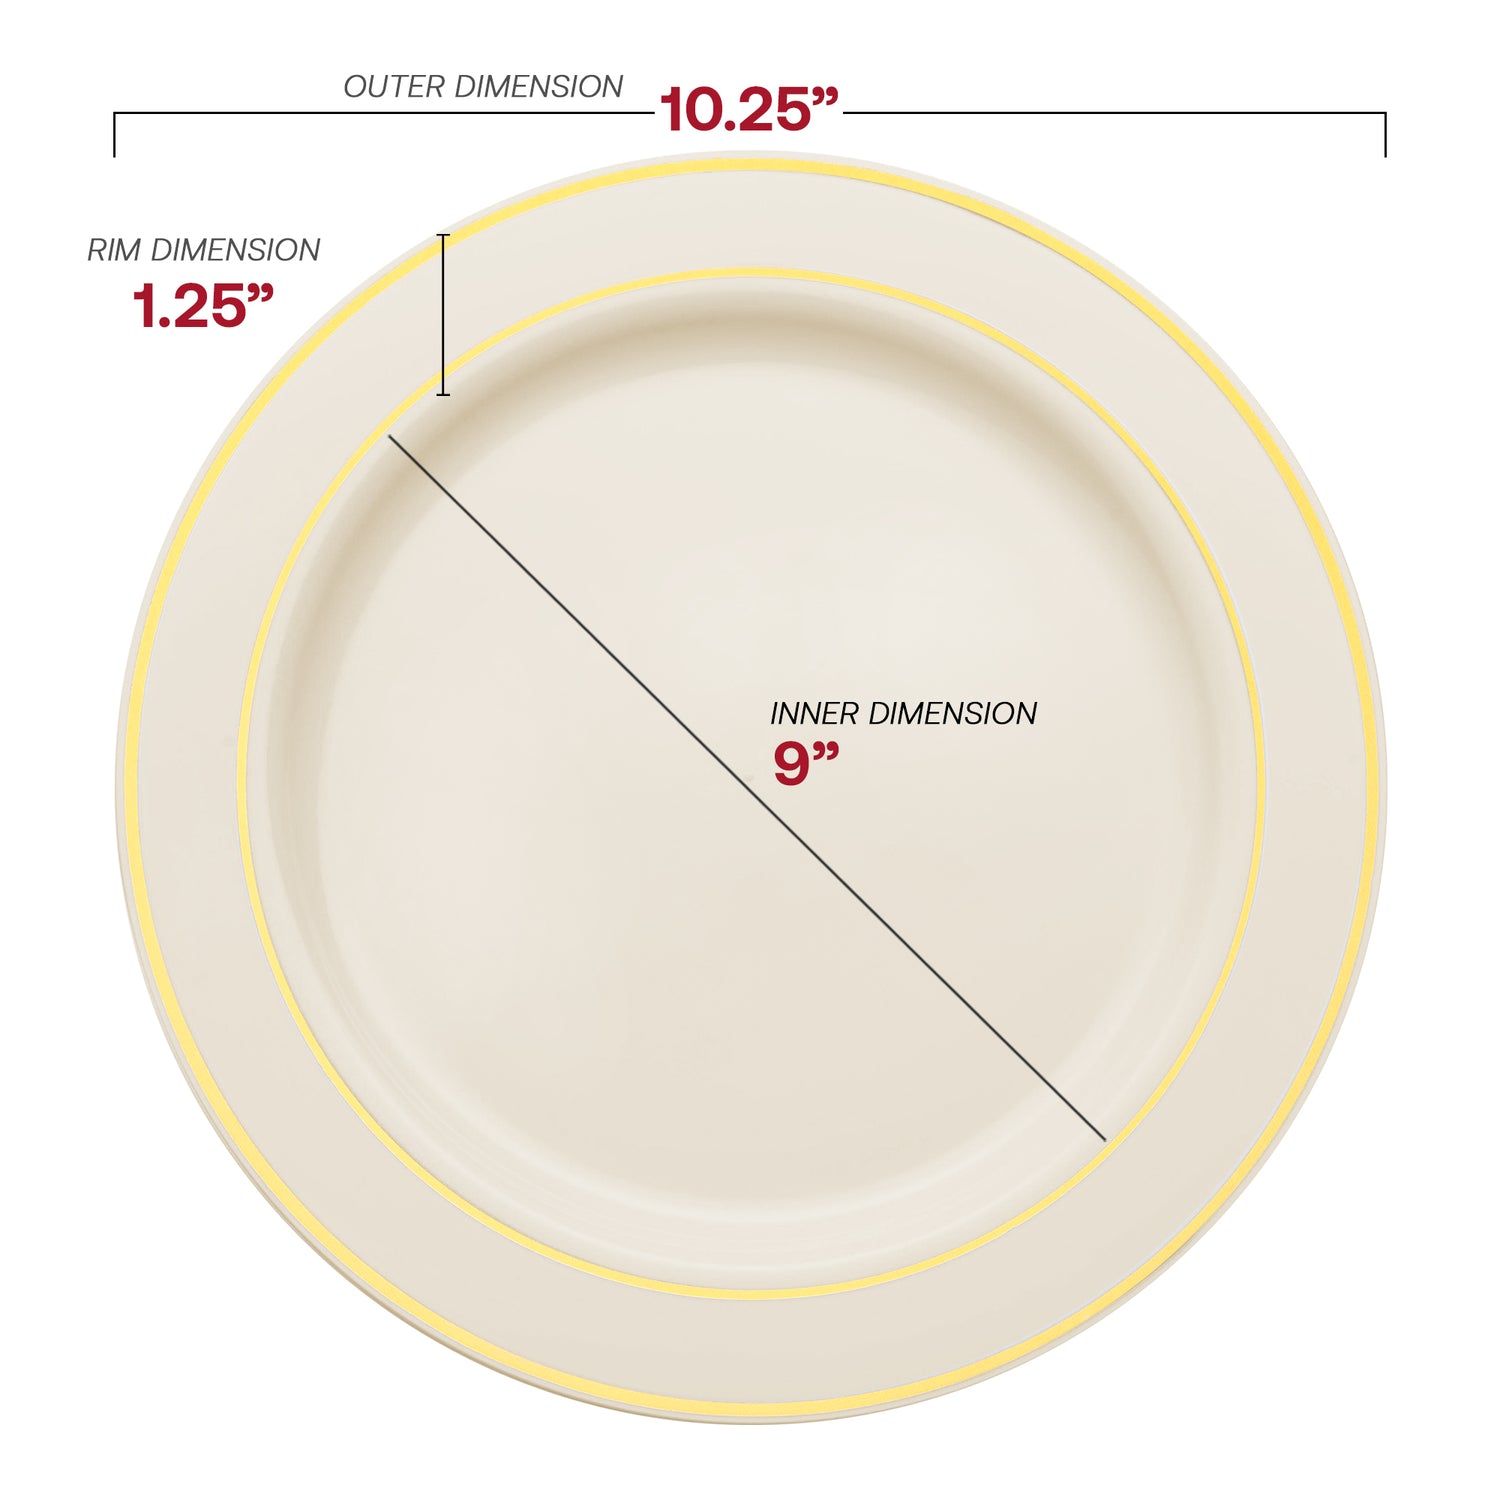 Ivory with Gold Edge Rim Plastic Dinner Plates (10.25") Dimension | The Kaya Collection